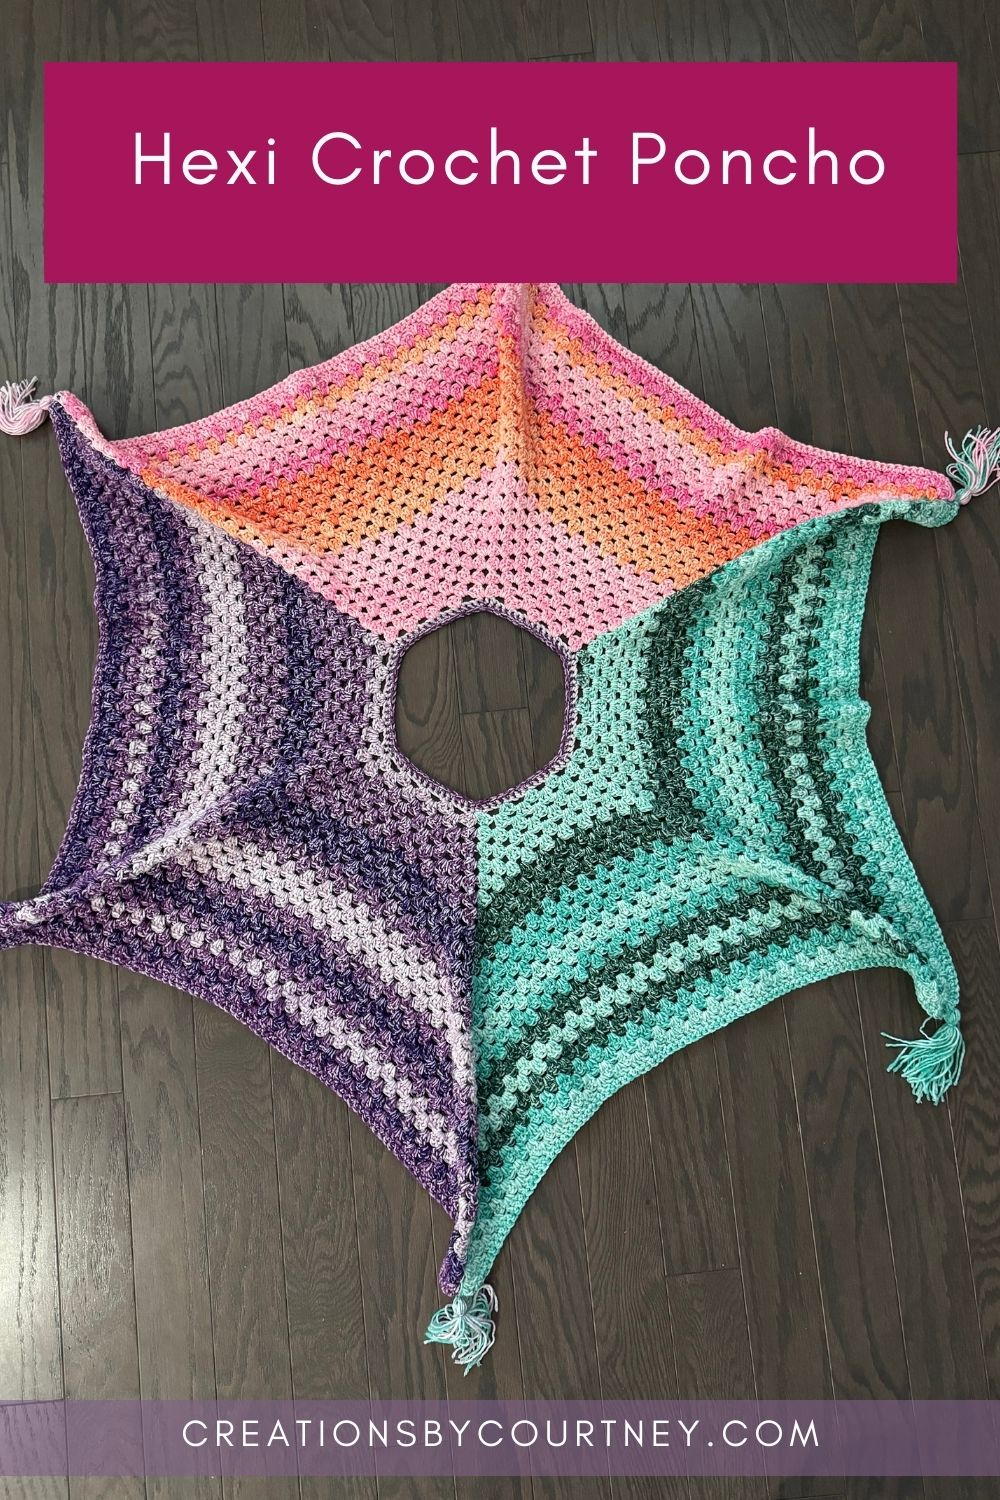 An image of a crochet hexagon made of three colors with tassels at each point. Each color covers one third of the crochet poncho. It's a great layer for spring or fall.